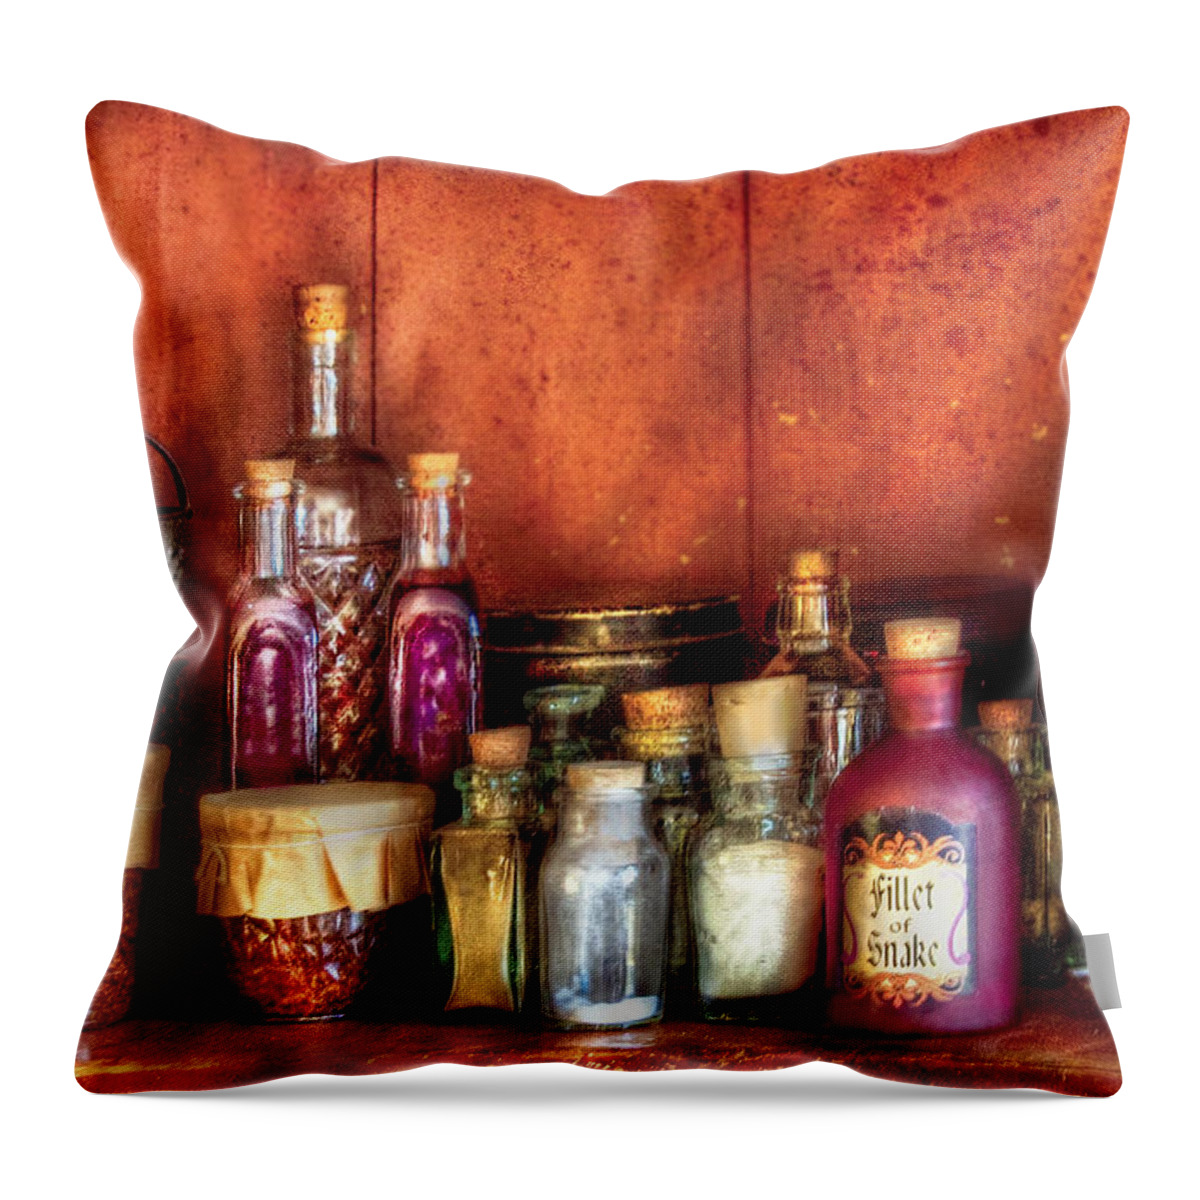 Savad Throw Pillow featuring the photograph Fantasy - Wizard's Ingredients by Mike Savad